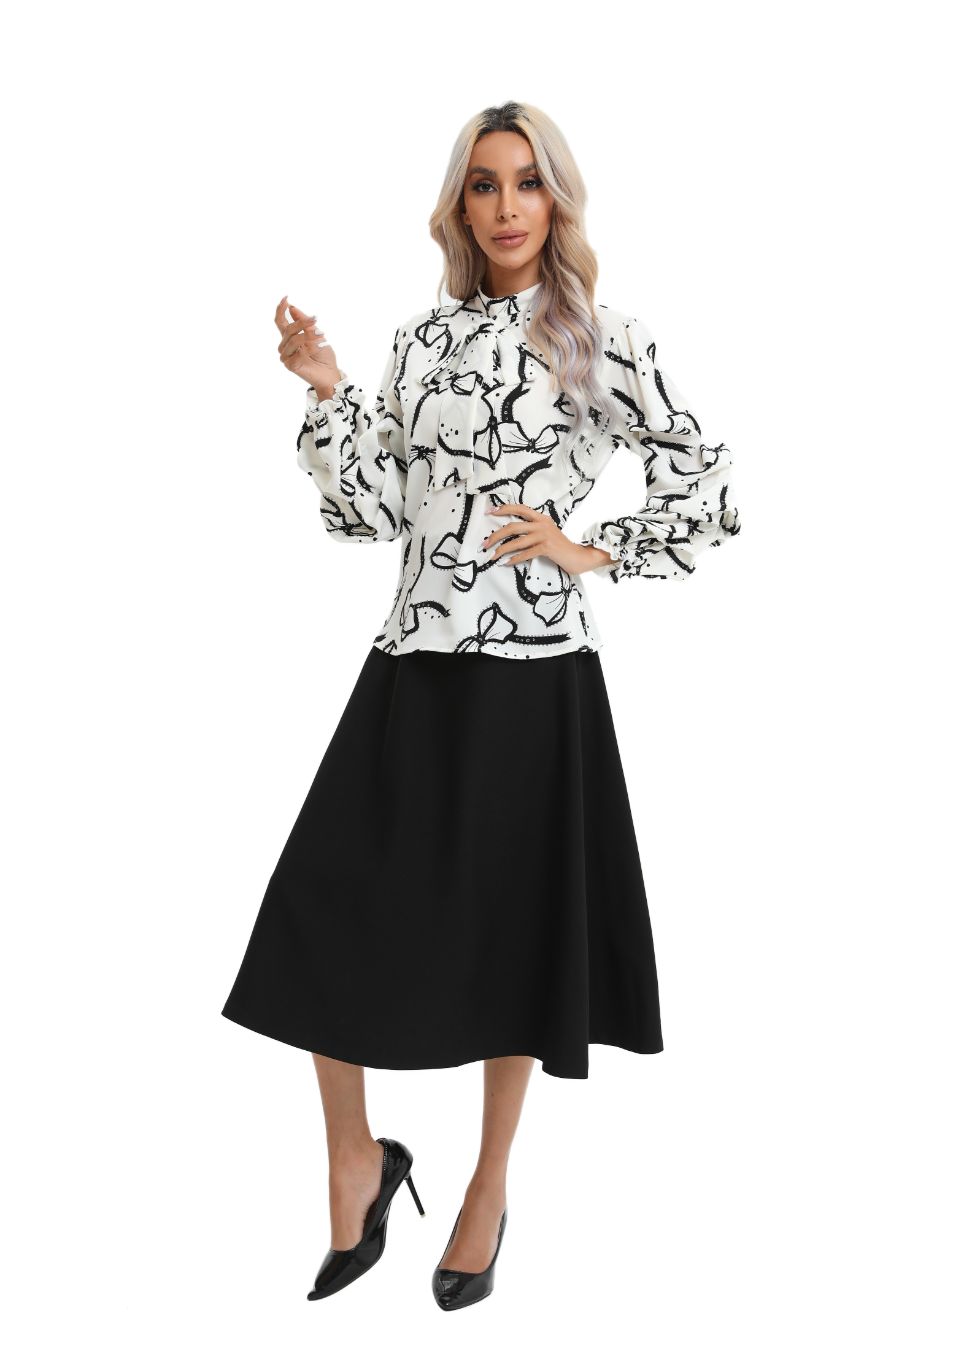 Tiered Balloon Blouse with Front Tie - alamaud